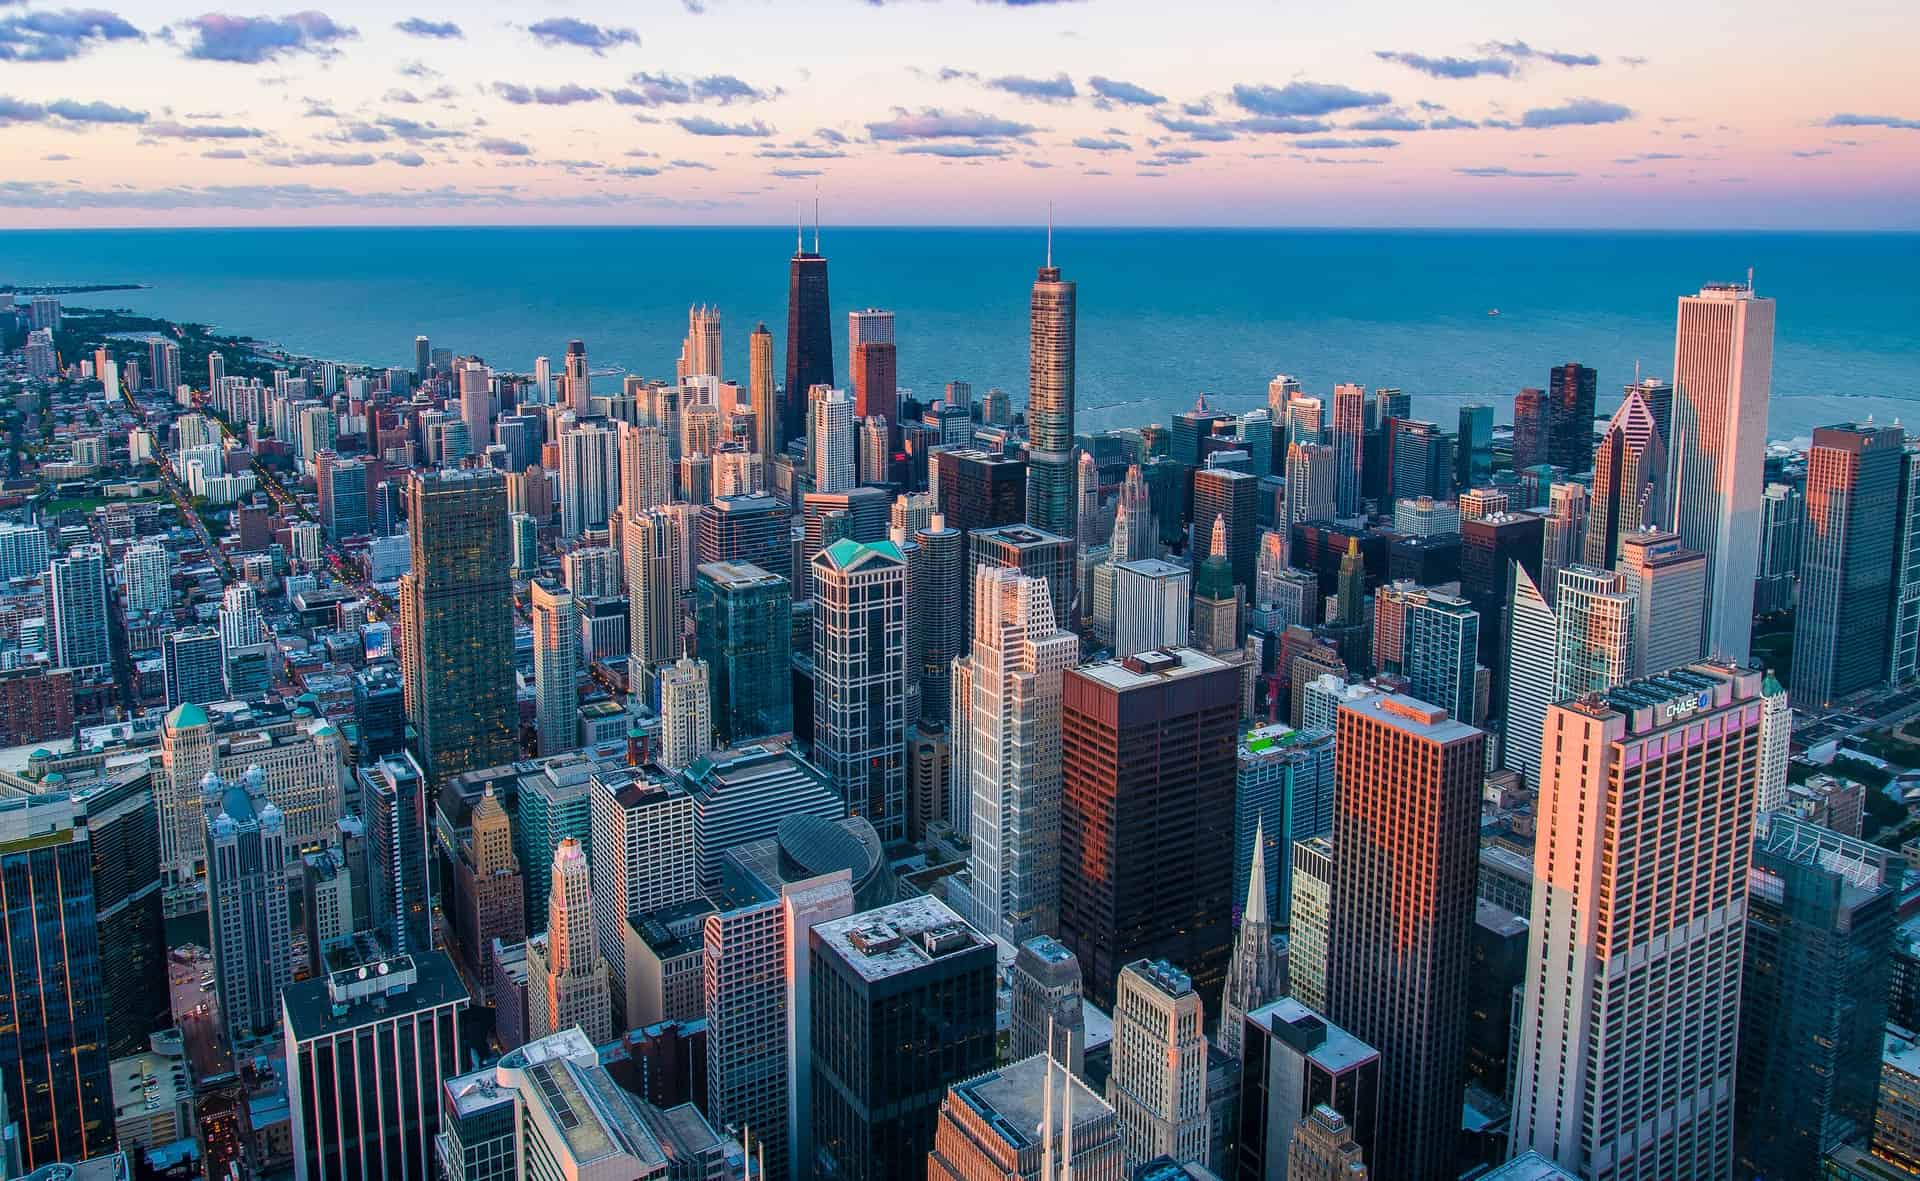 Best things to do in Chicago Illinois - Bethany Bayless - Chicago skyline by Pedro Lastra on Unsplash